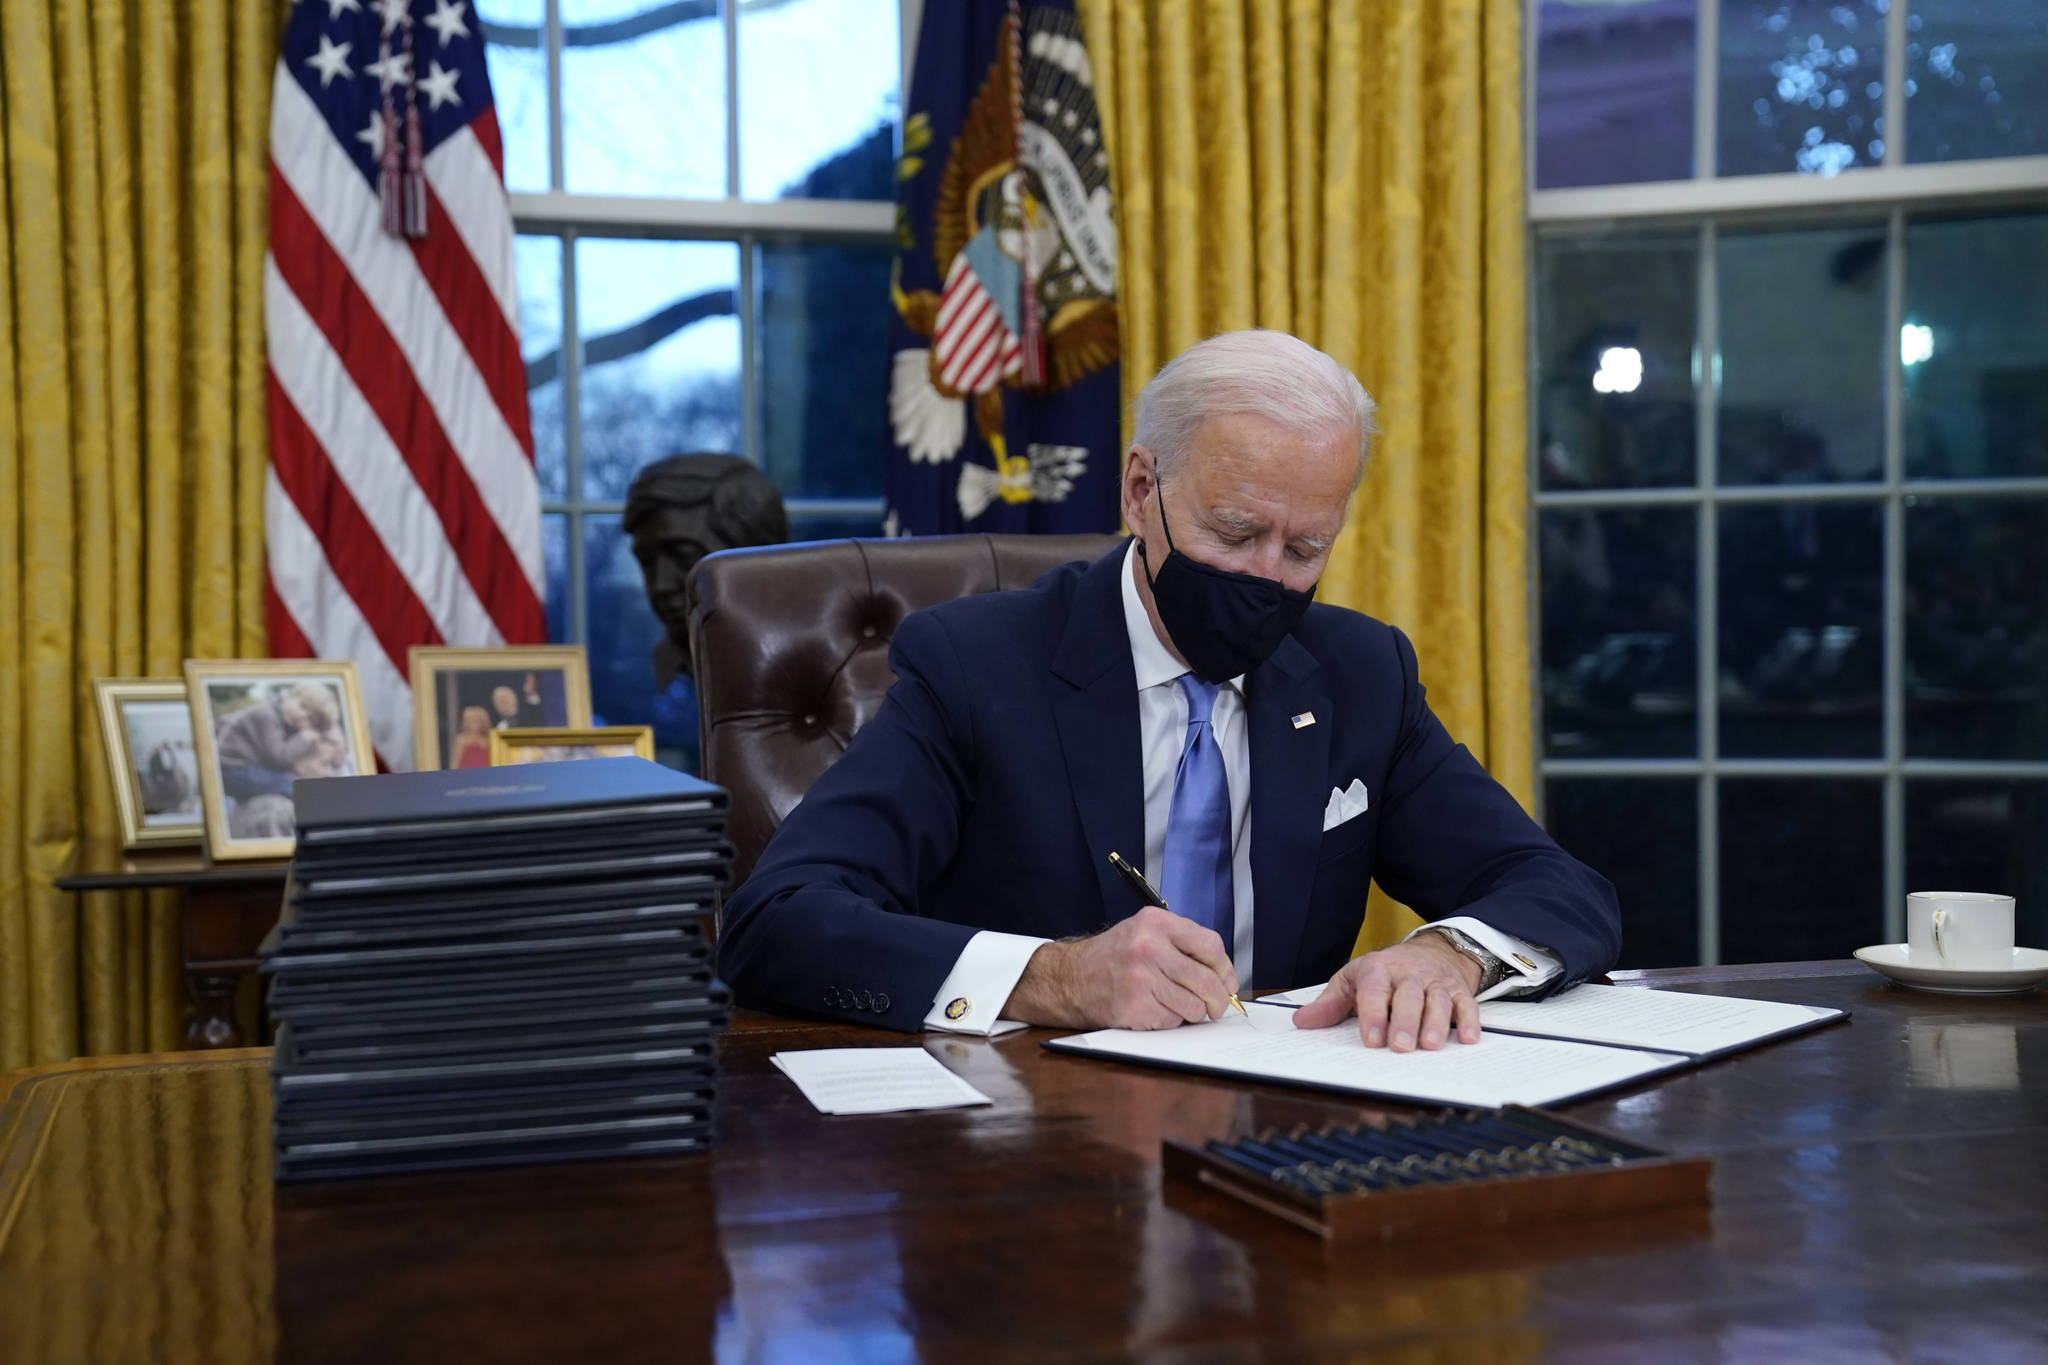 President Joe Biden signs his first executive order in the Oval Office of the White House on Wednesday, Jan. 20, 2021, in Washington. (AP Photo / Evan Vucci)